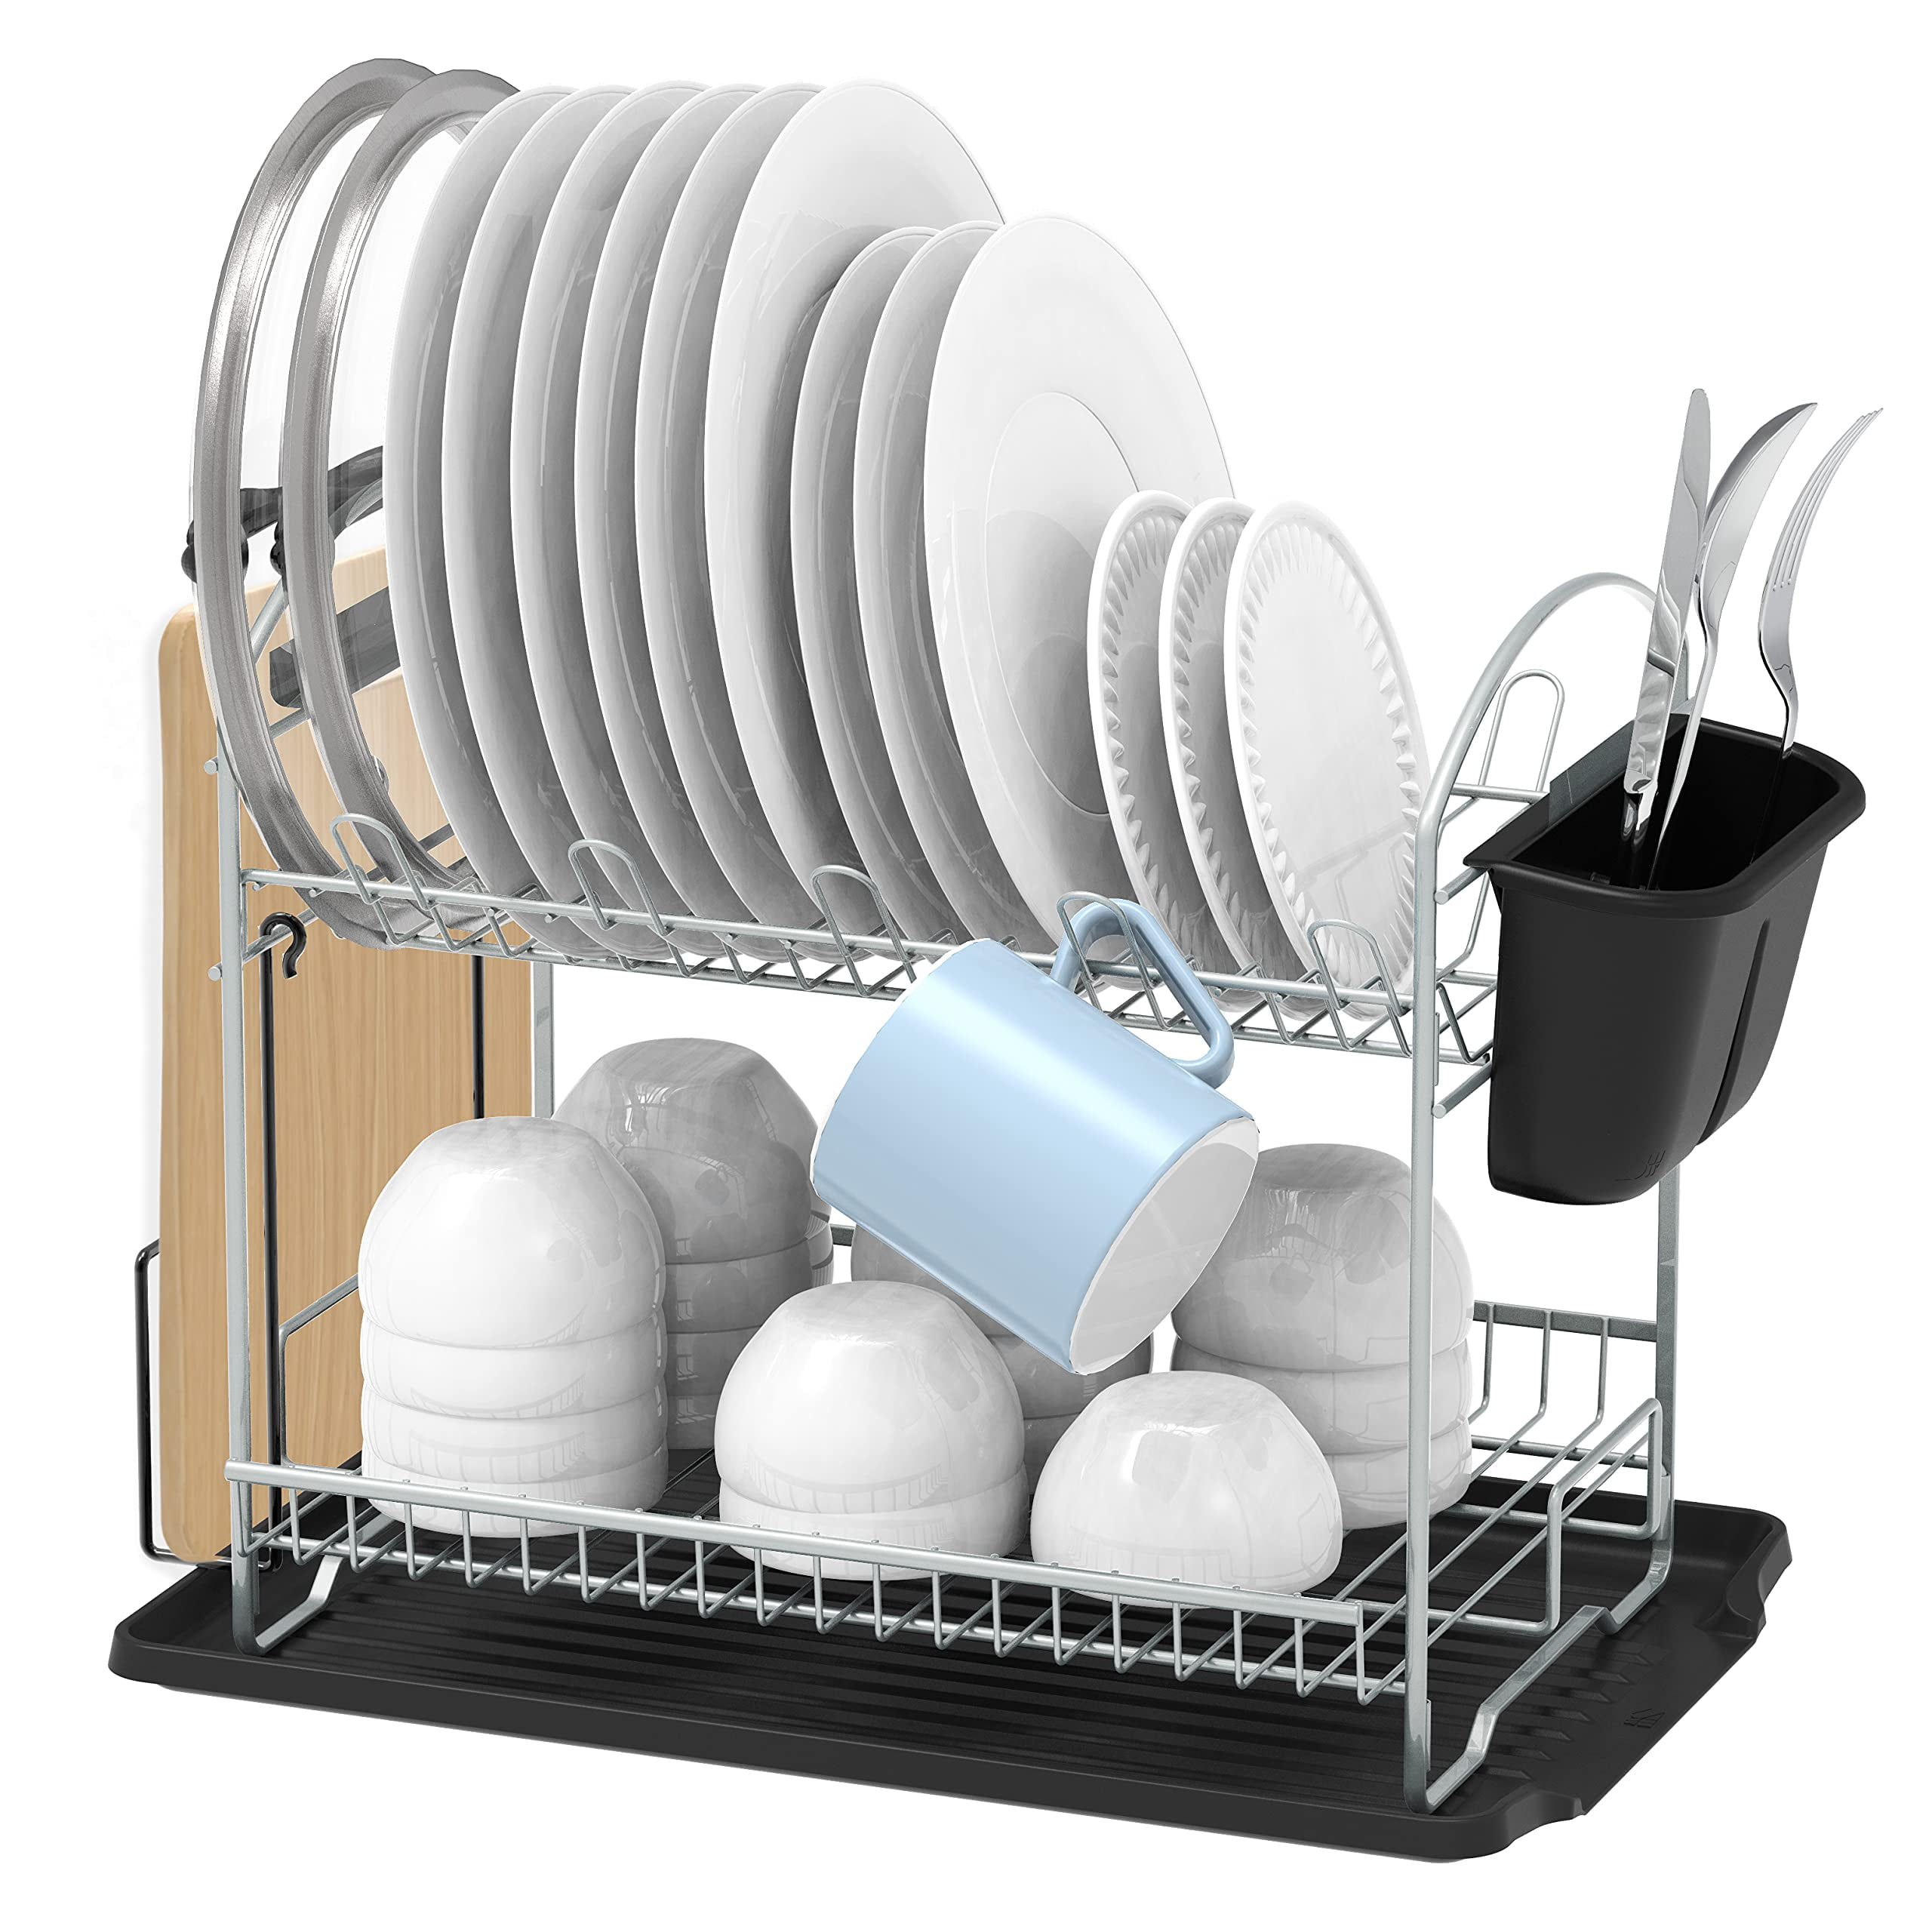 2-Tier Deluxe Kitchen Dish Drying Rack (Silver/Black), by Home Basics | Big  Dish Drying Rack for Plates, Teacups, Bowls, Cups, and Silverware 